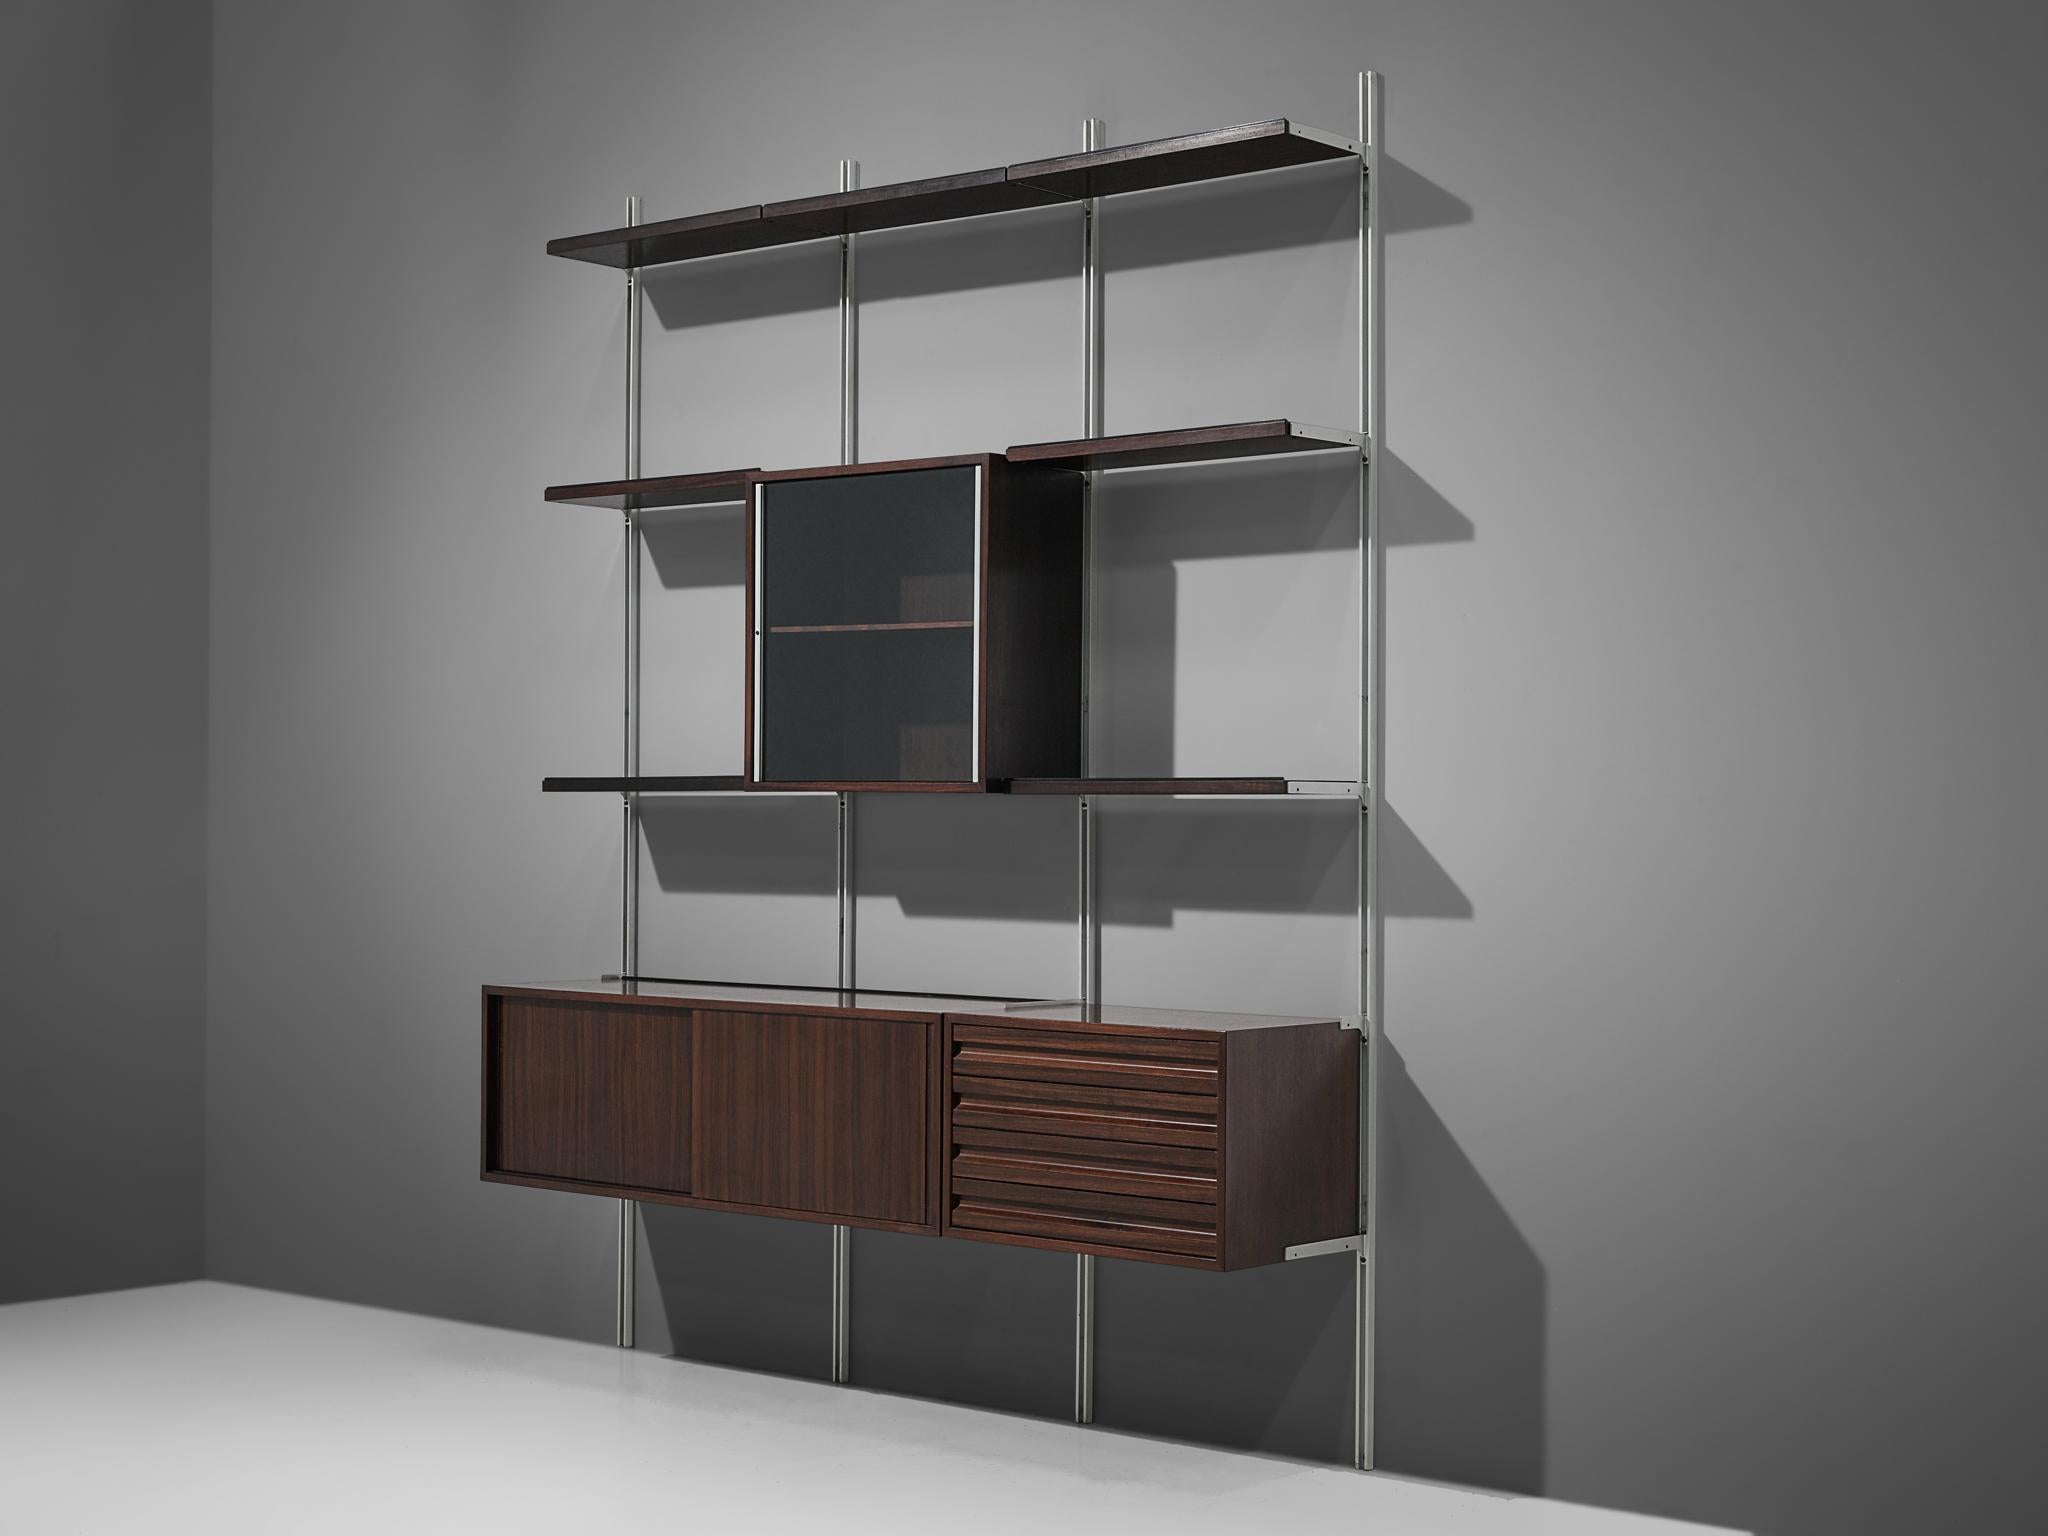 Osvaldo Borsani for Tecno, wall unit, metal and walnut, Italy, 1950s.

Modular shelving system designed by Osvaldo Borsani. The system was developed by Borsani as coordinated system for furnishing either the home or the office, the E22 is composed